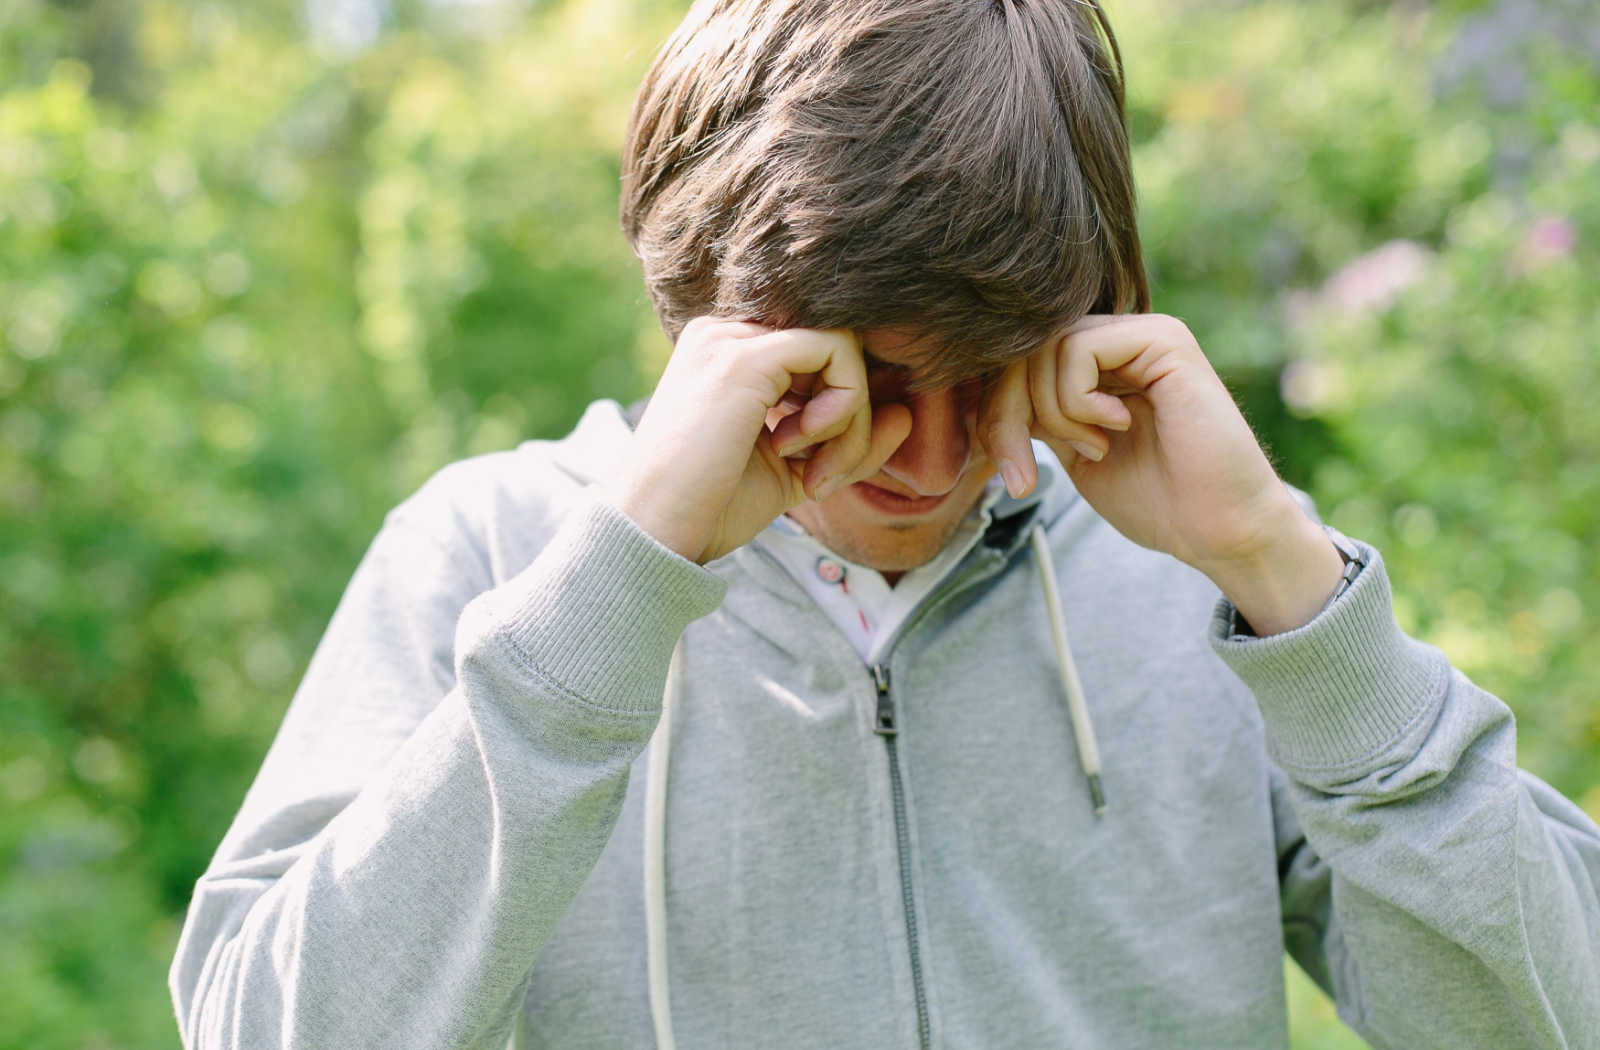 A young man outside rubbing his eyes.